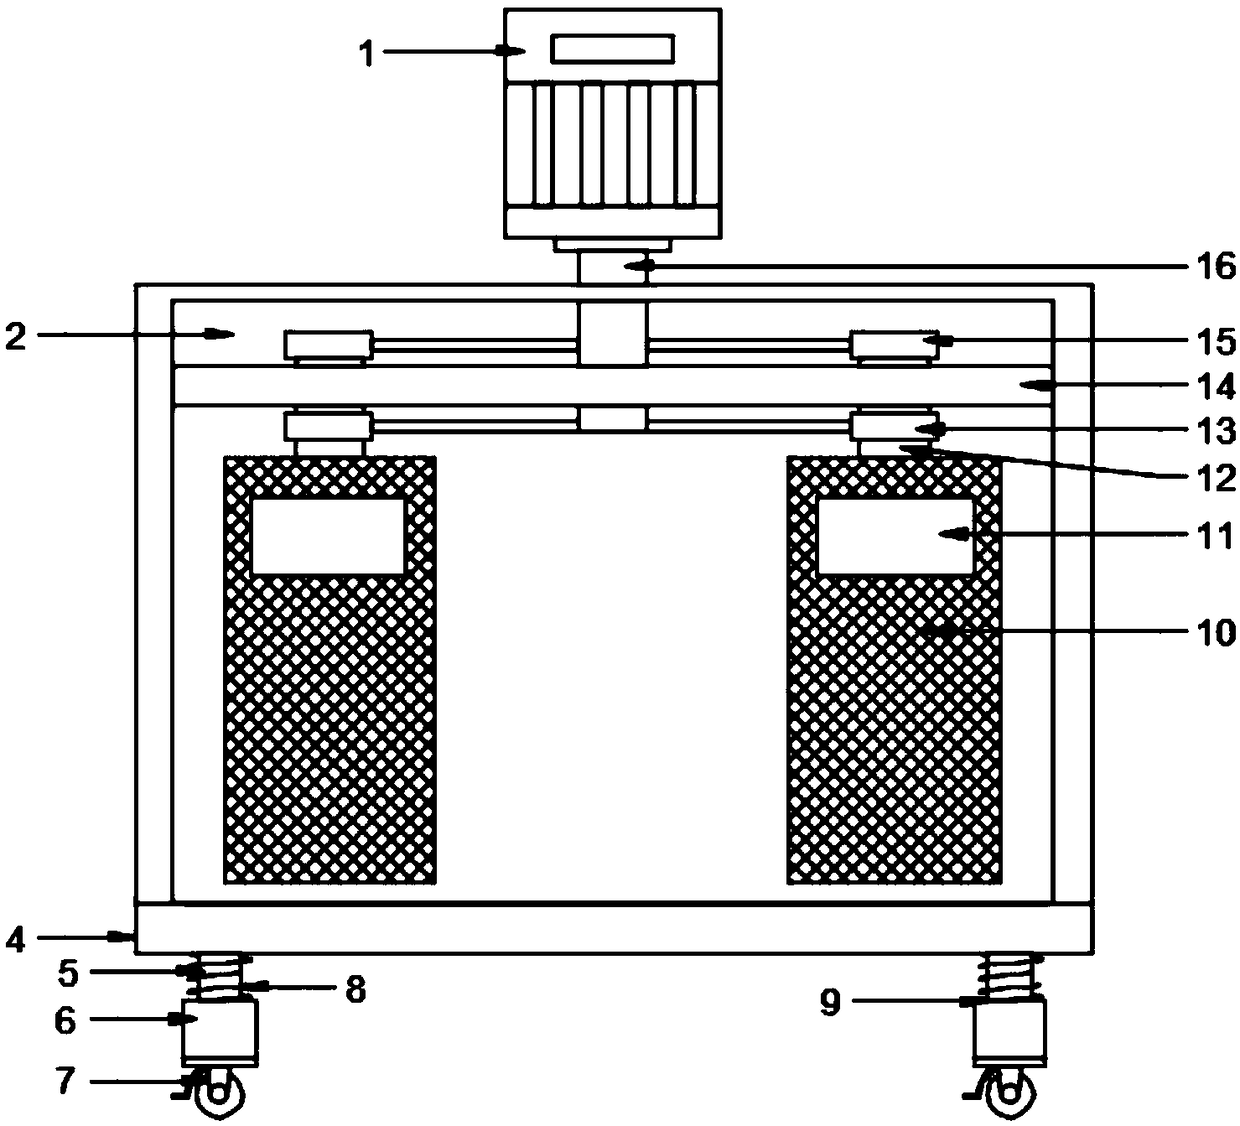 Filter device used for benomyl production and used after reactor treatment